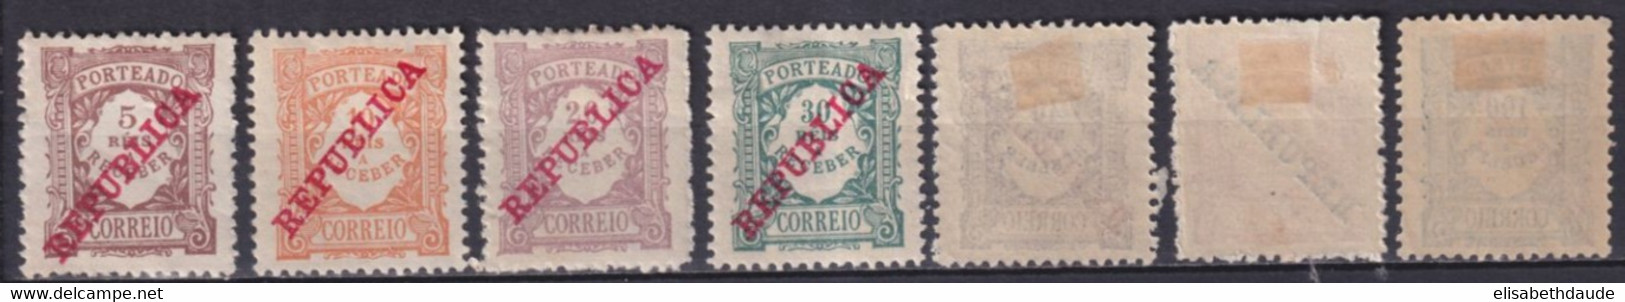 PORTUGAL - 1910 - SERIE COMPLETE TAXE YVERT N° 14/20 * MH - COTE = 20 EUR - Nuovi